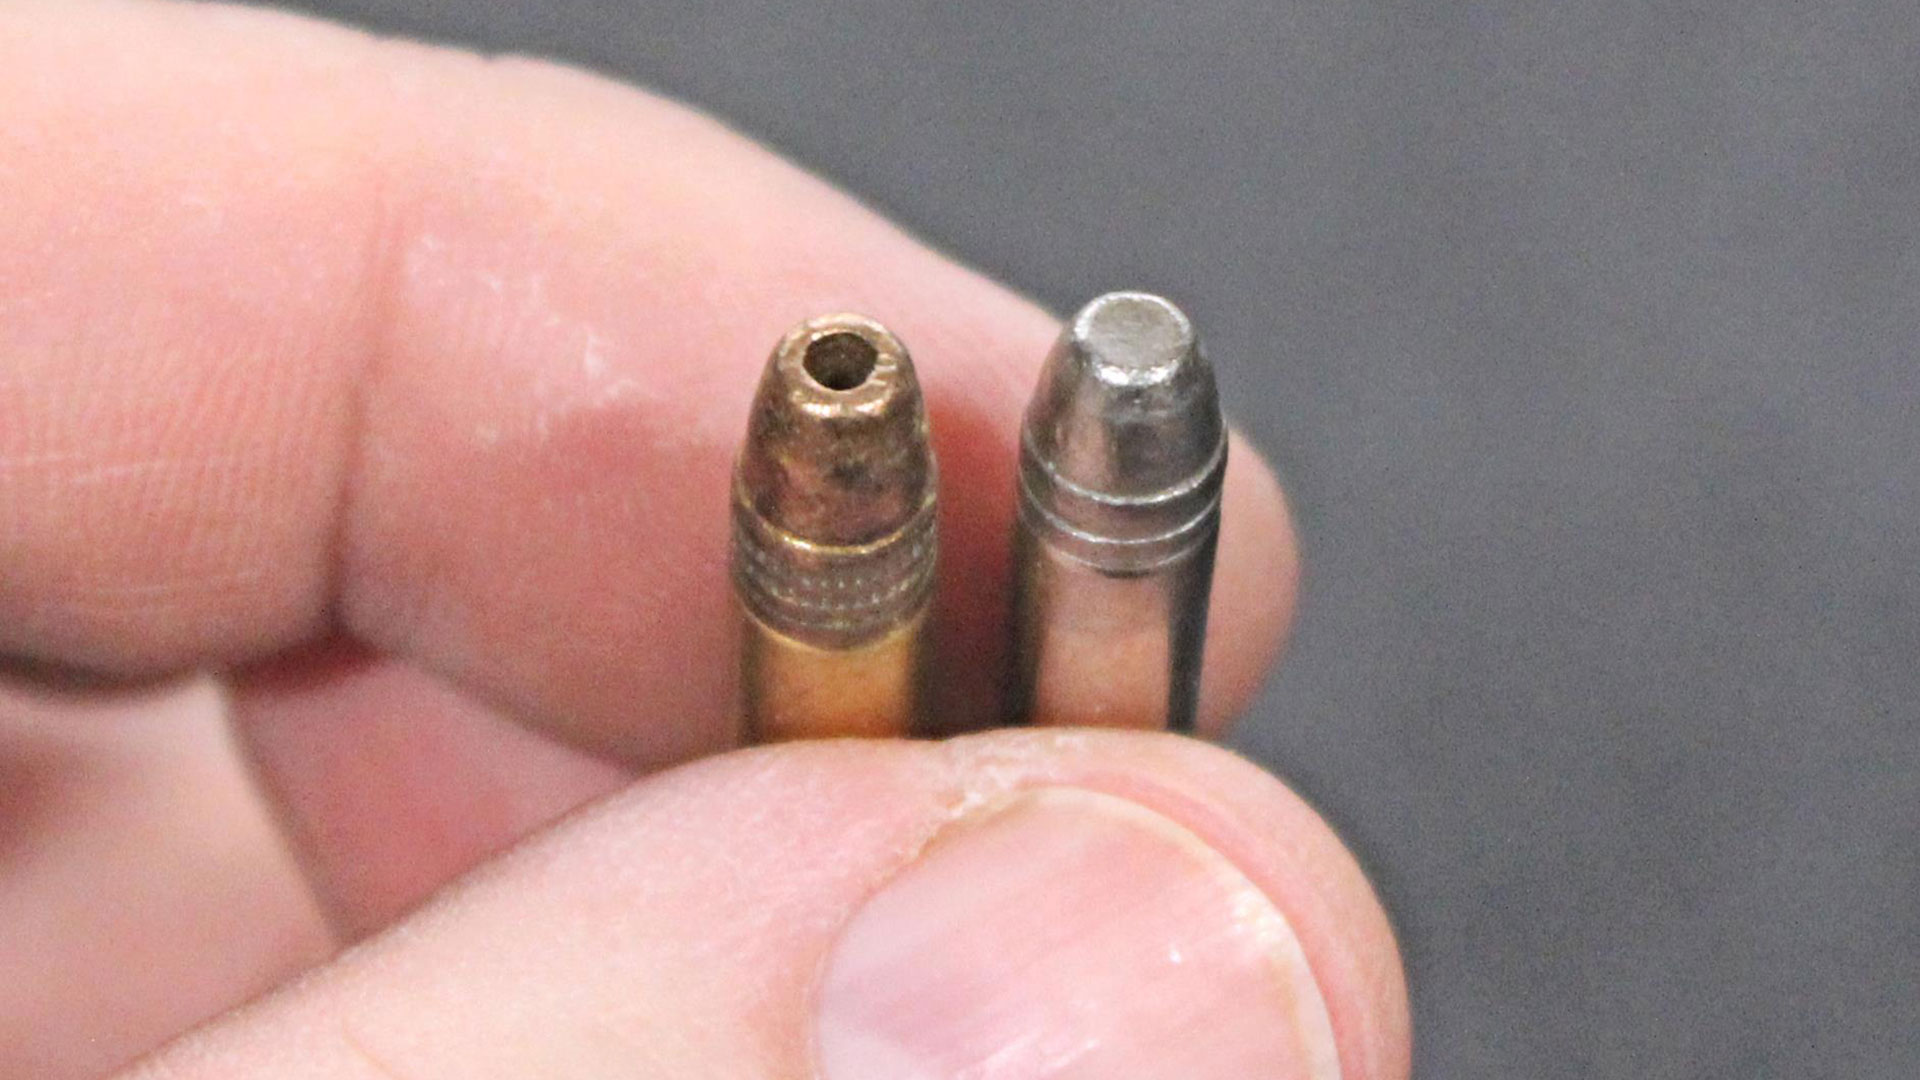 A typical .22 LR hollow point bullet (left) compared to the deep penetrating Federal Premium Punch bullet.